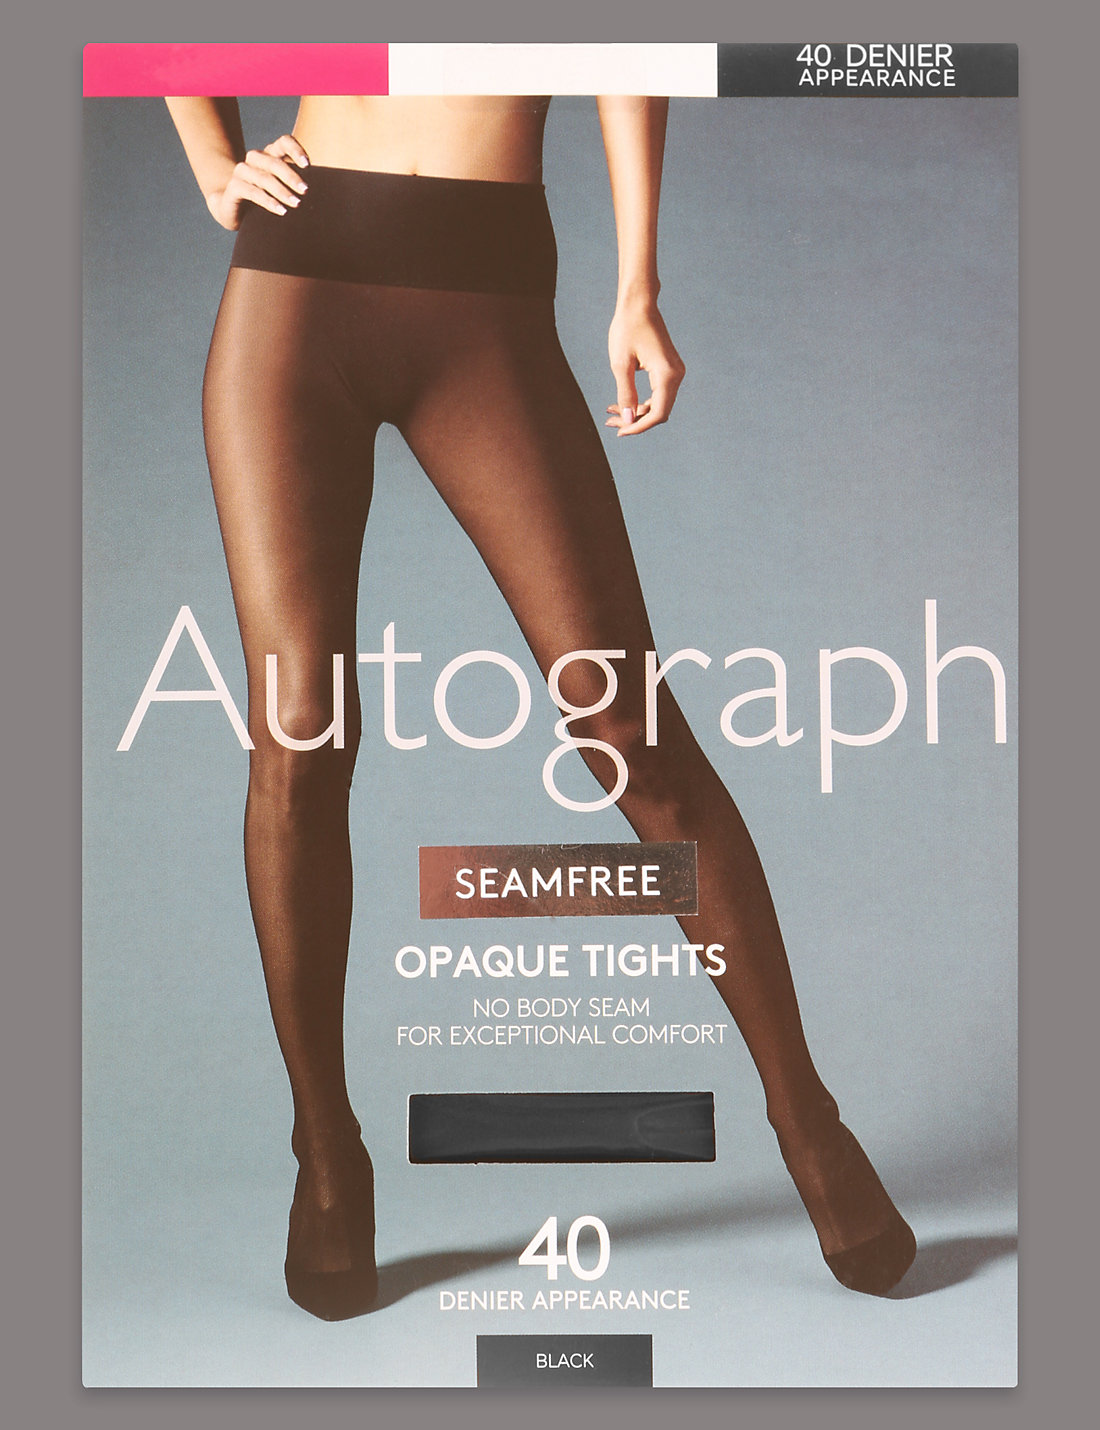 Wolford Satin Touch Tights, Shiny Footless Pantyhose Luxury Finish 